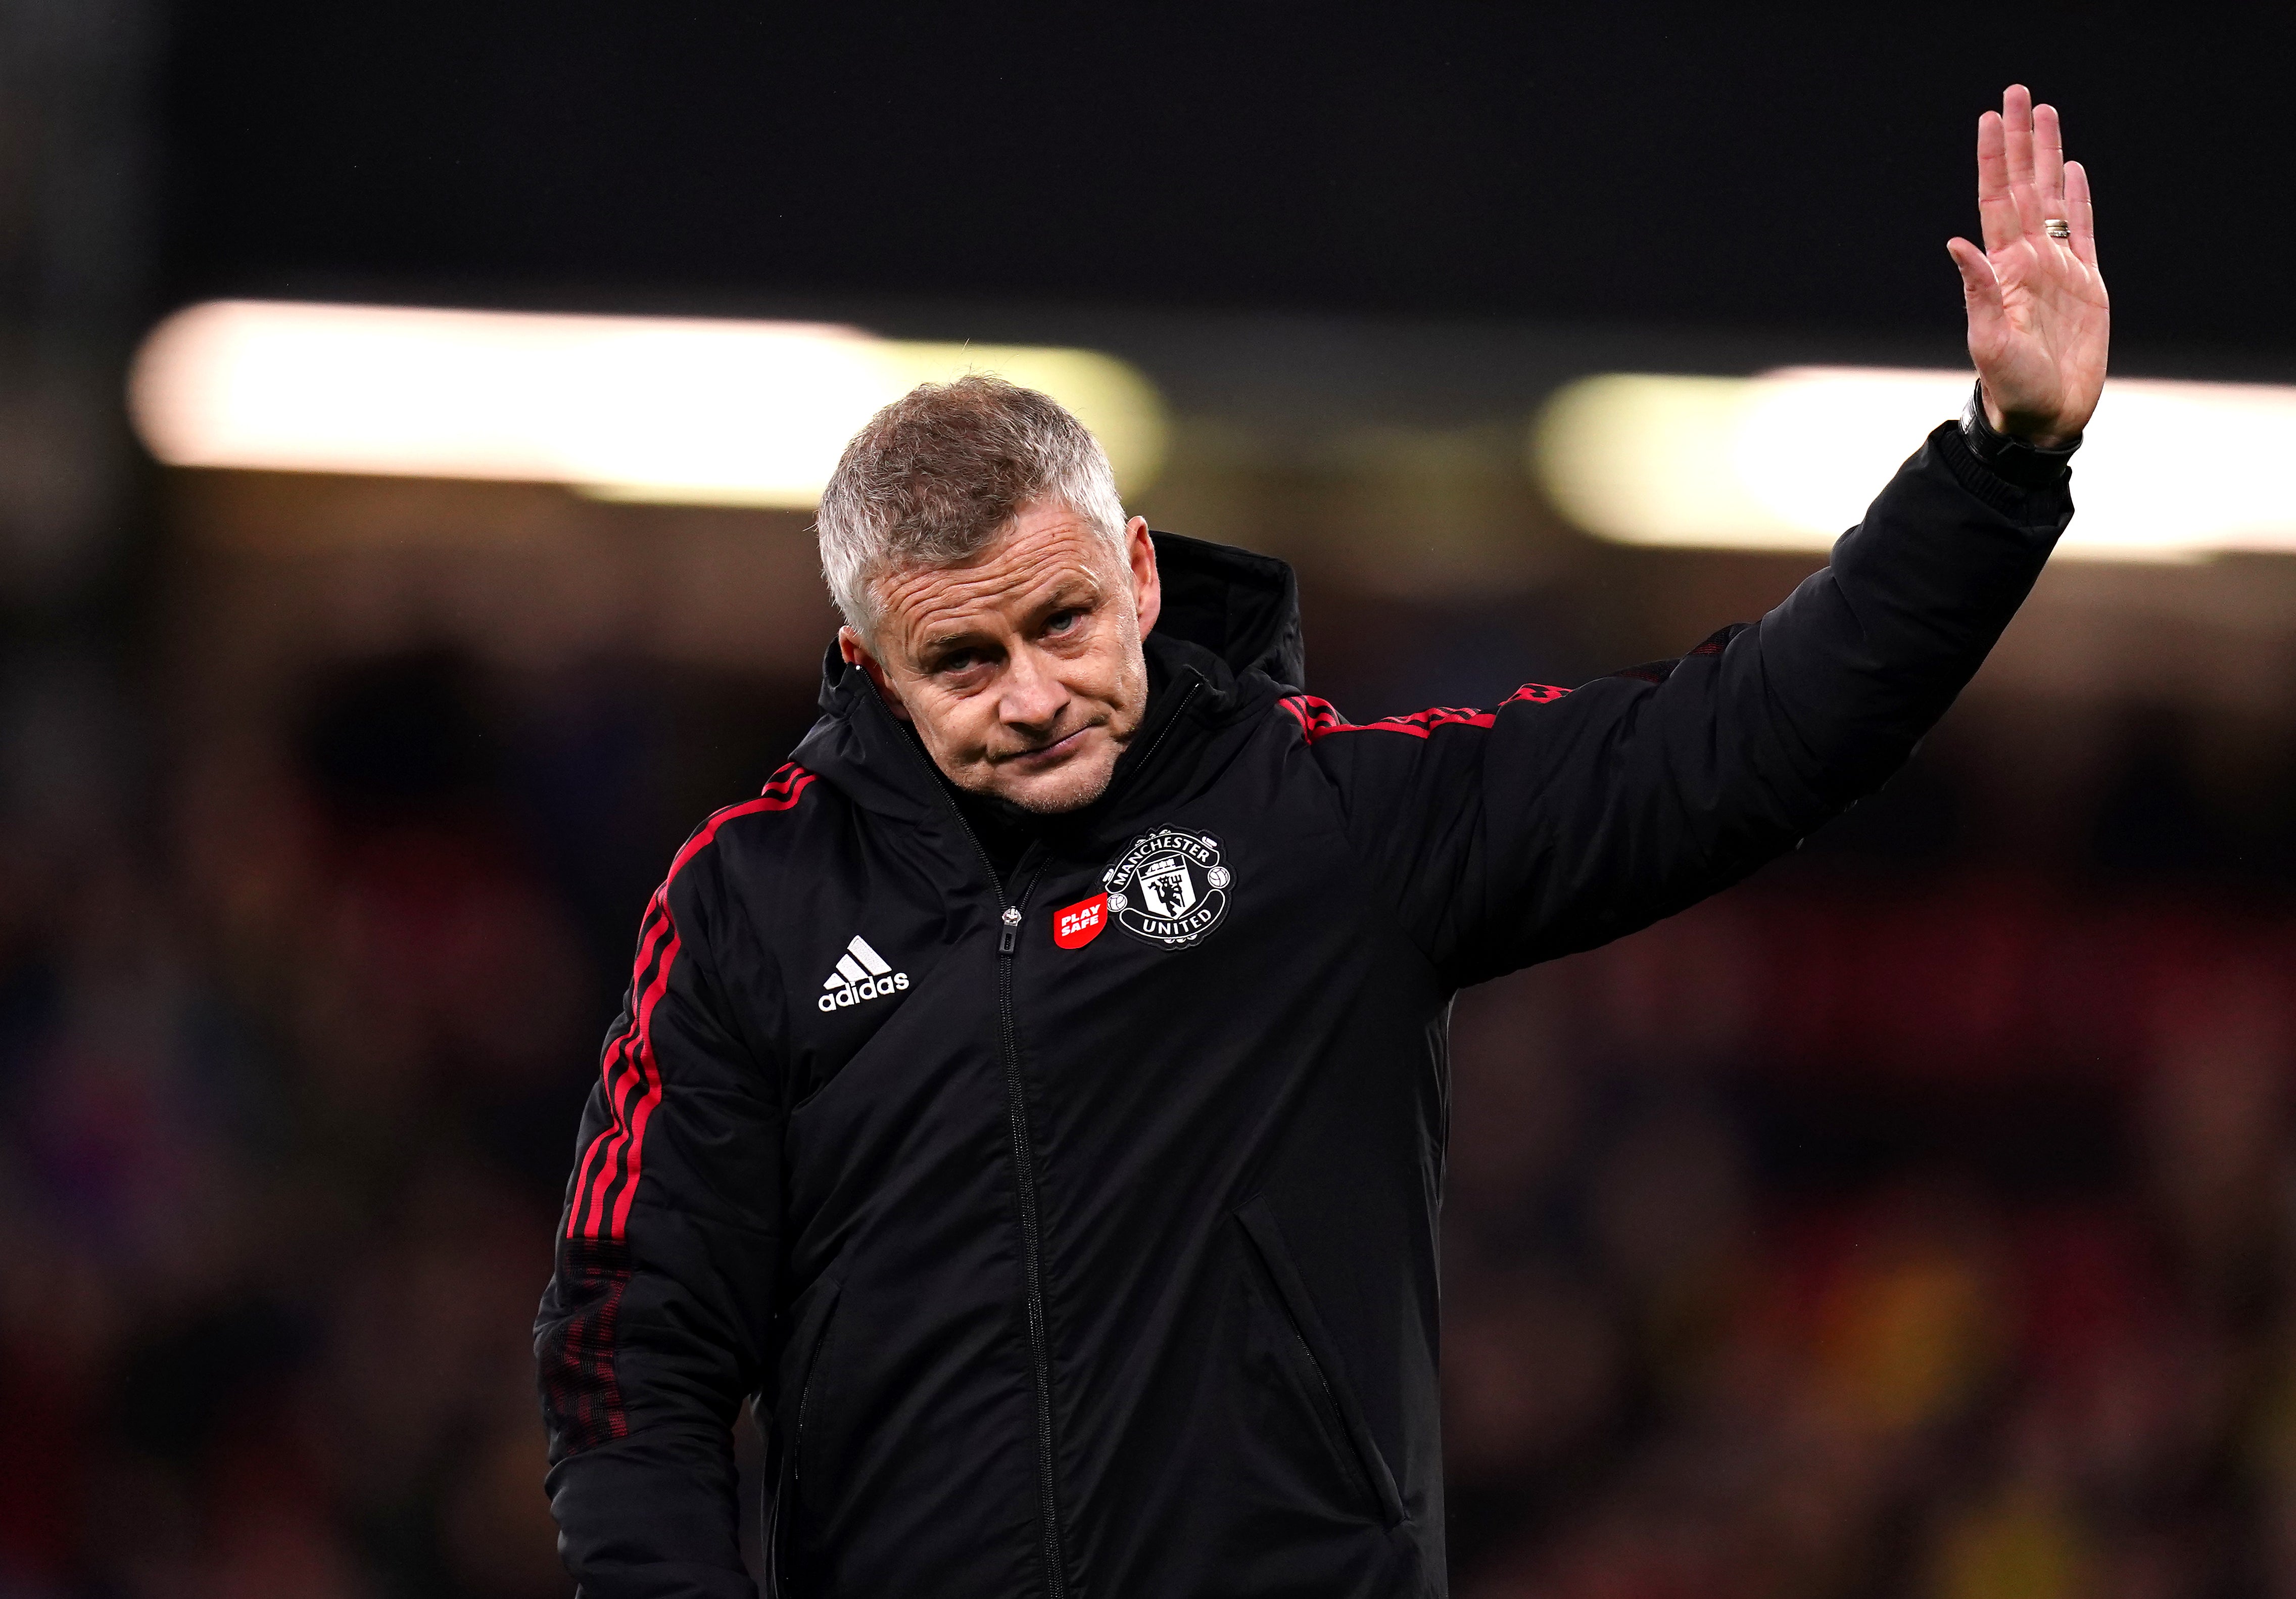 Manchester United manager Ole Gunnar Solskjaer holds up his hand in apology to the travelling supporters after the heavy defeat to Watford (John Walton/PA)